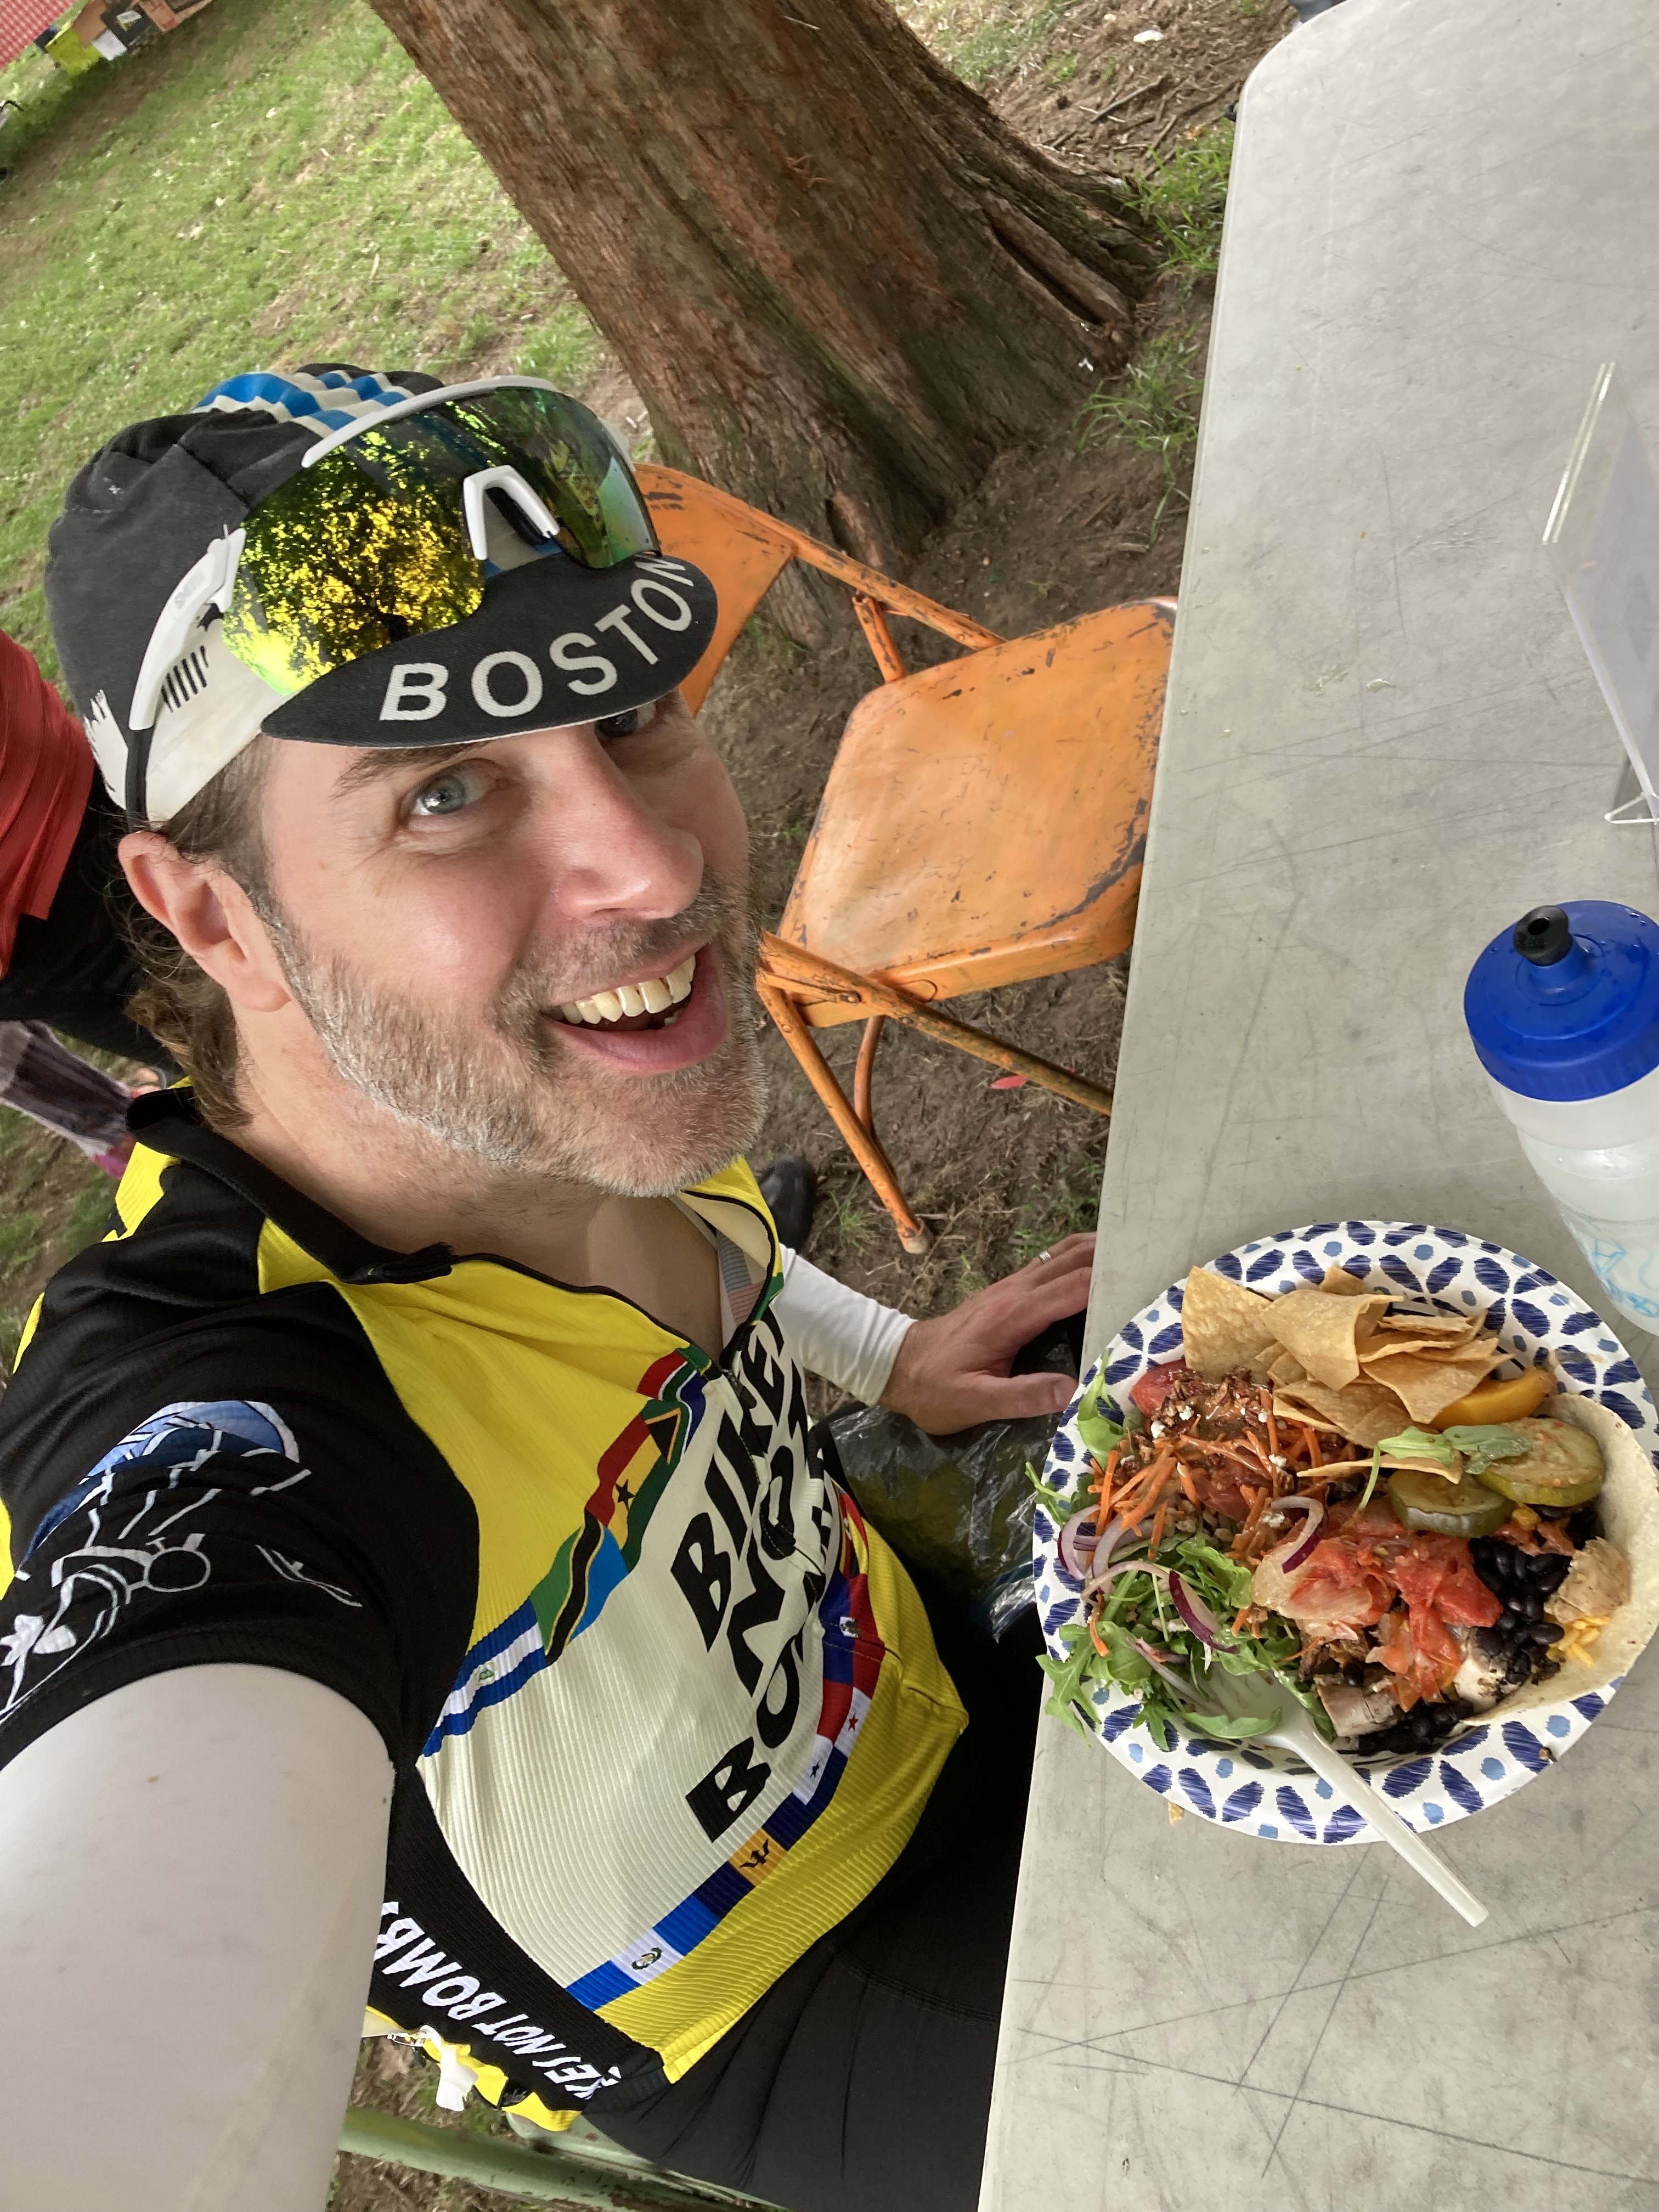 Enjoying the delicious food at the end of the 2022 Bike-A-Thon